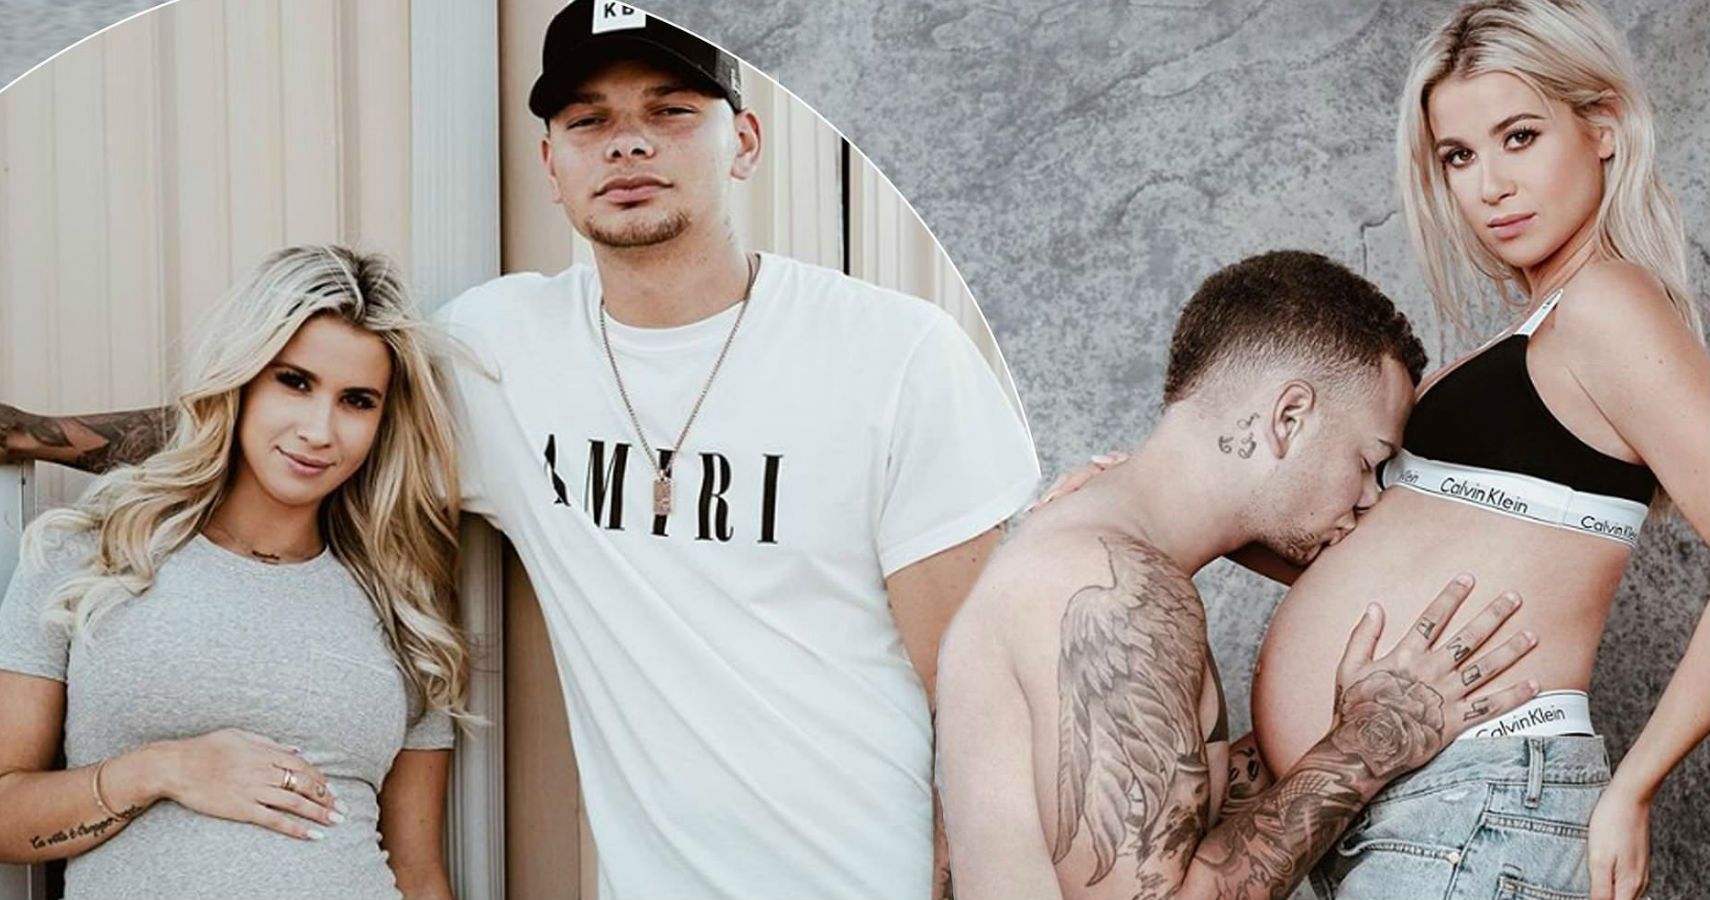 Kane Brown  Wife Katelyn Get Tattoos In Honor Of Their Daughter  Fast  Facts  YouTube